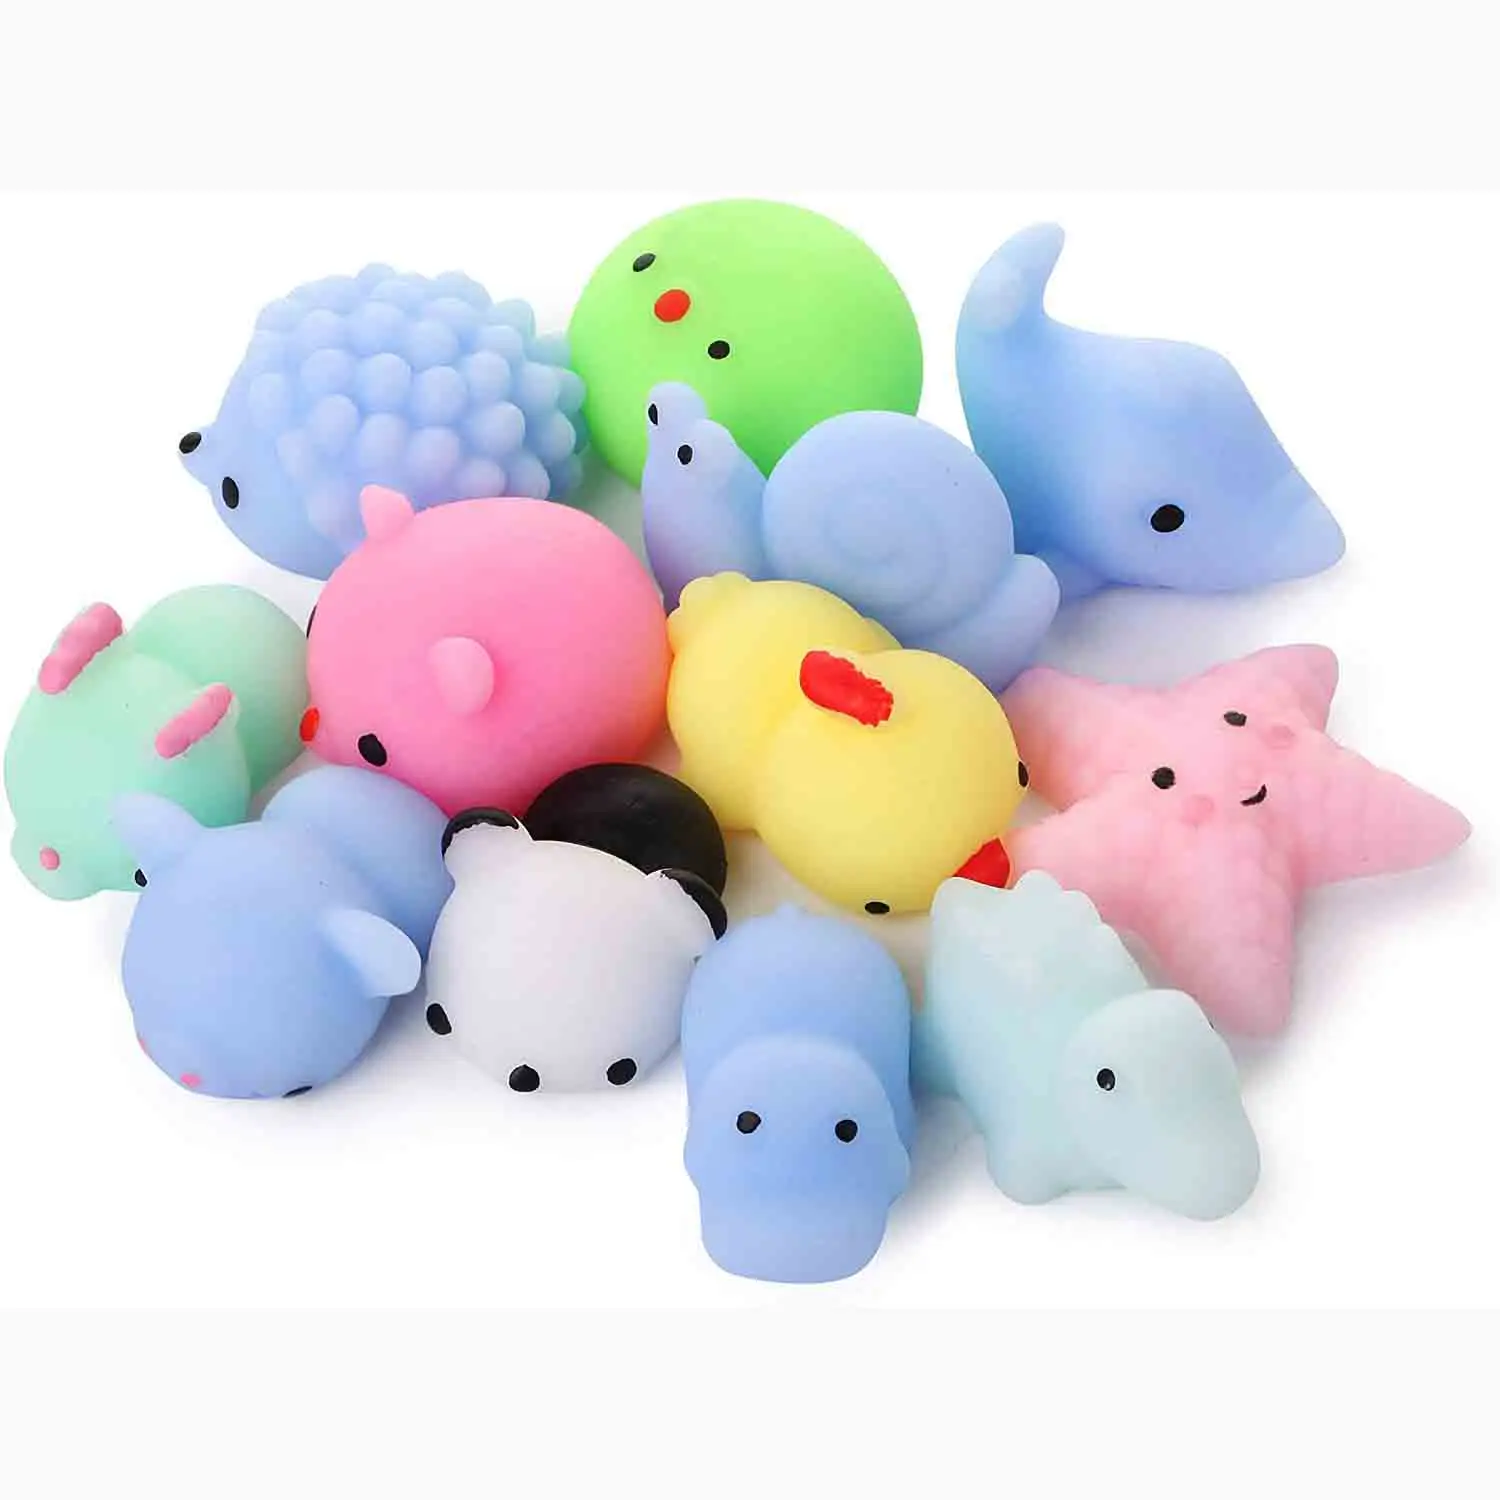 Random Color Design Glow In The Dark TPR Material Small Toys Animal Squishes Mini Size Mochi Squishy Animals Toy